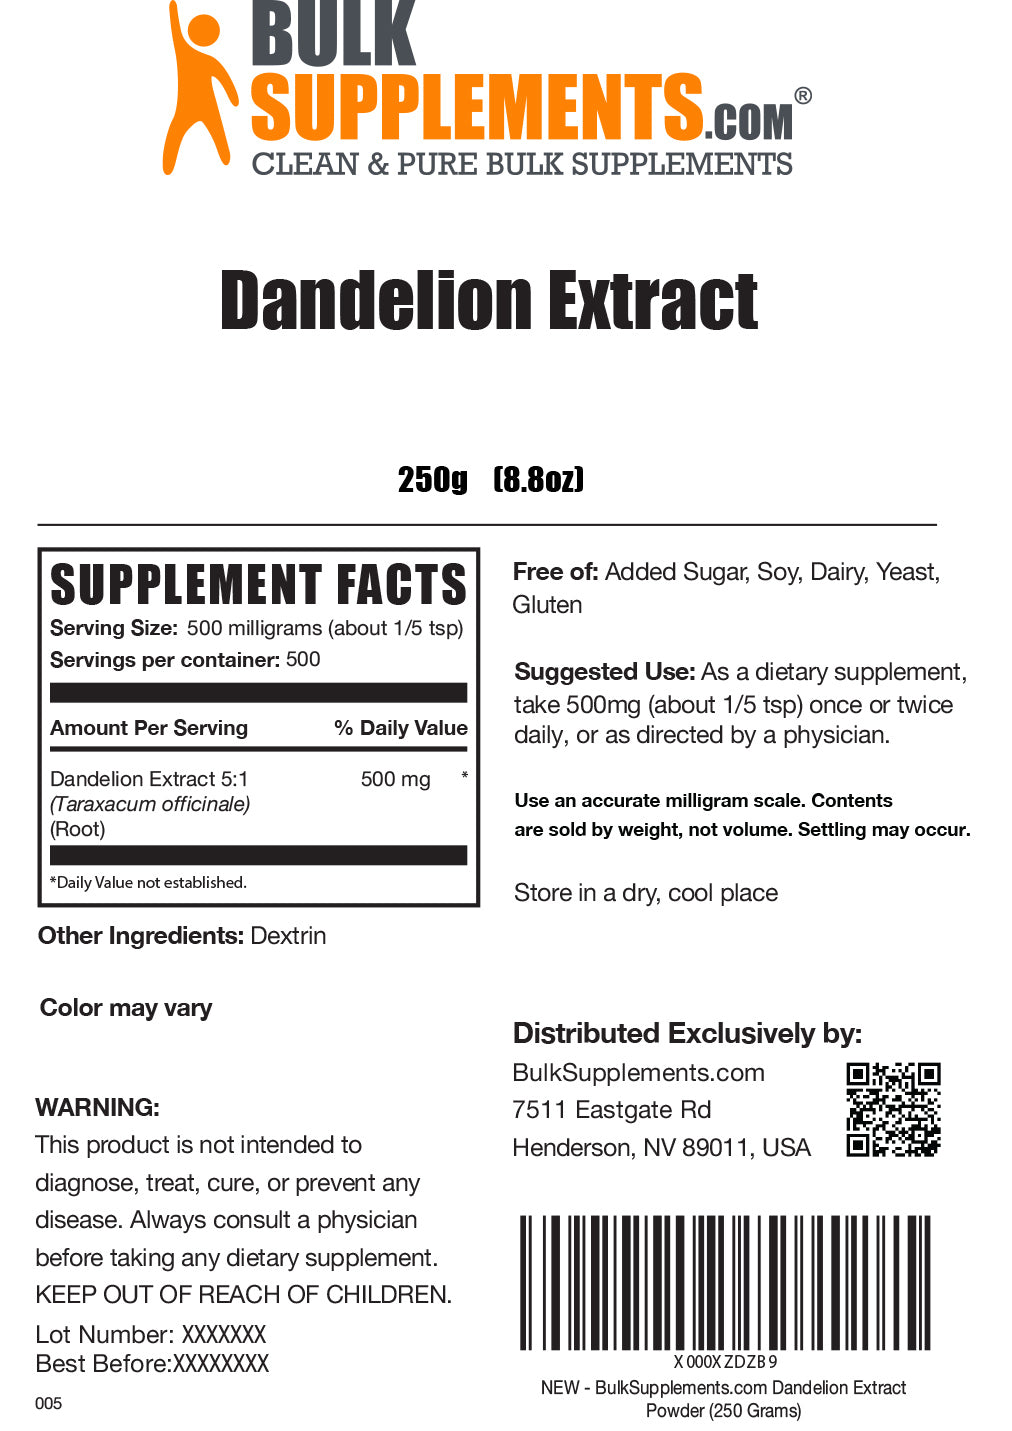 Supplement Facts for Dandelion Extract